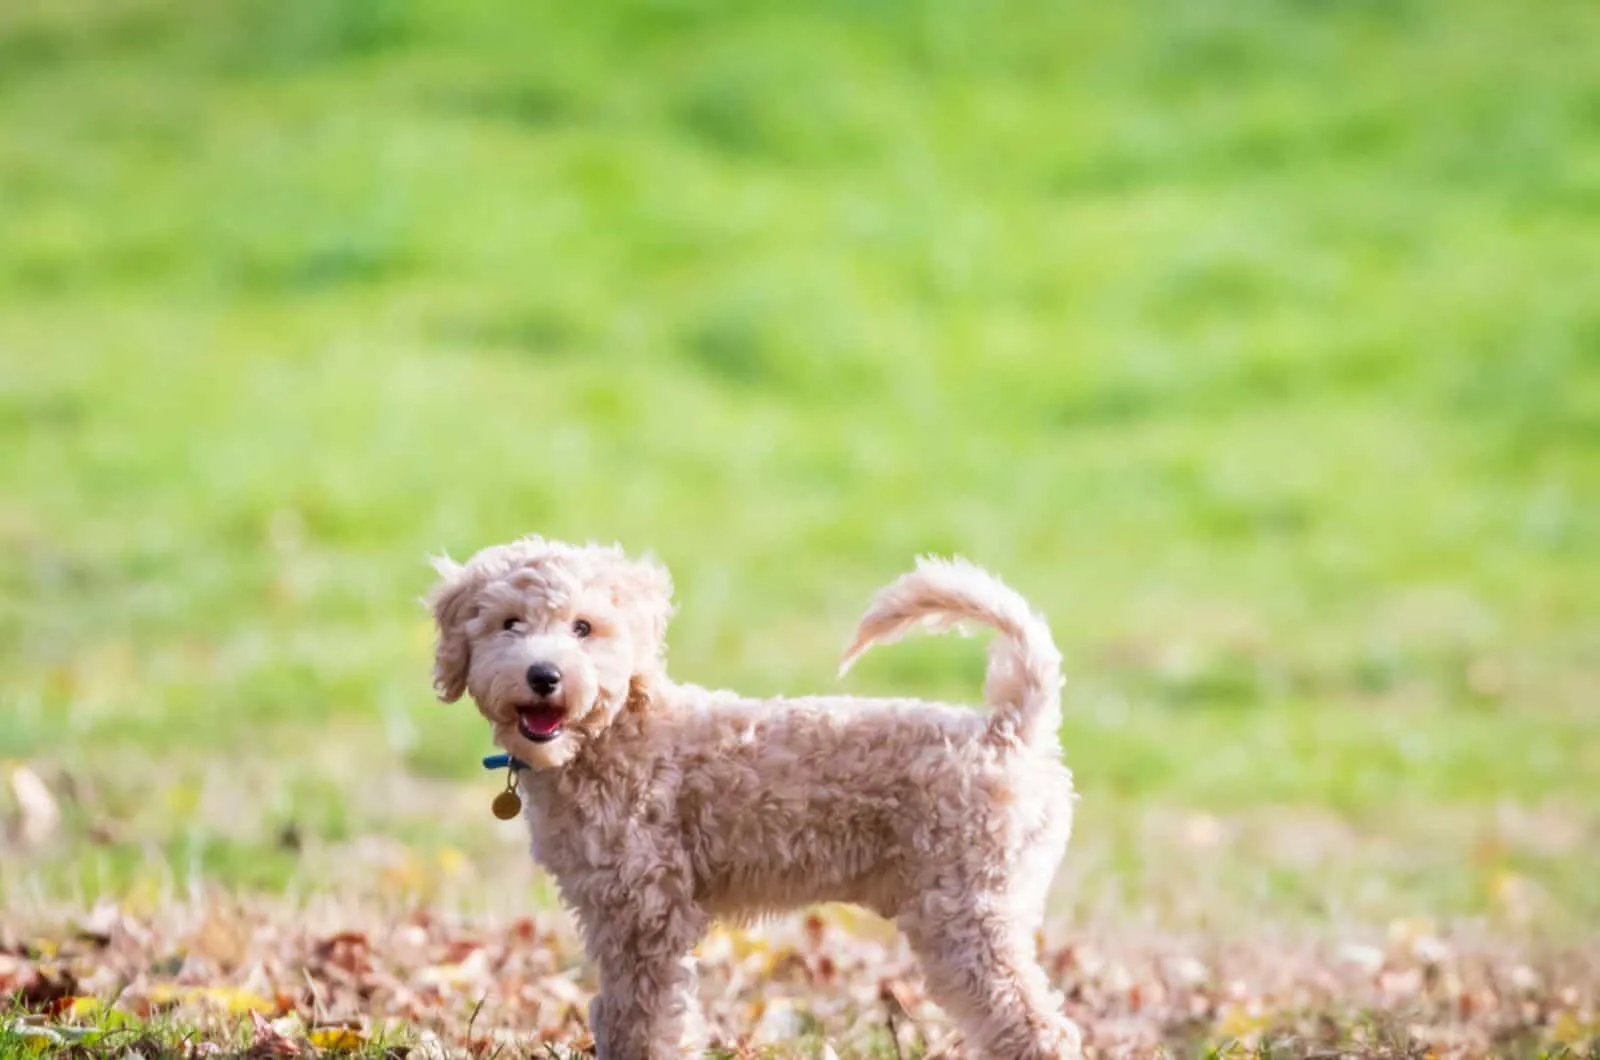 poochon puppy standing with tail up on green grass